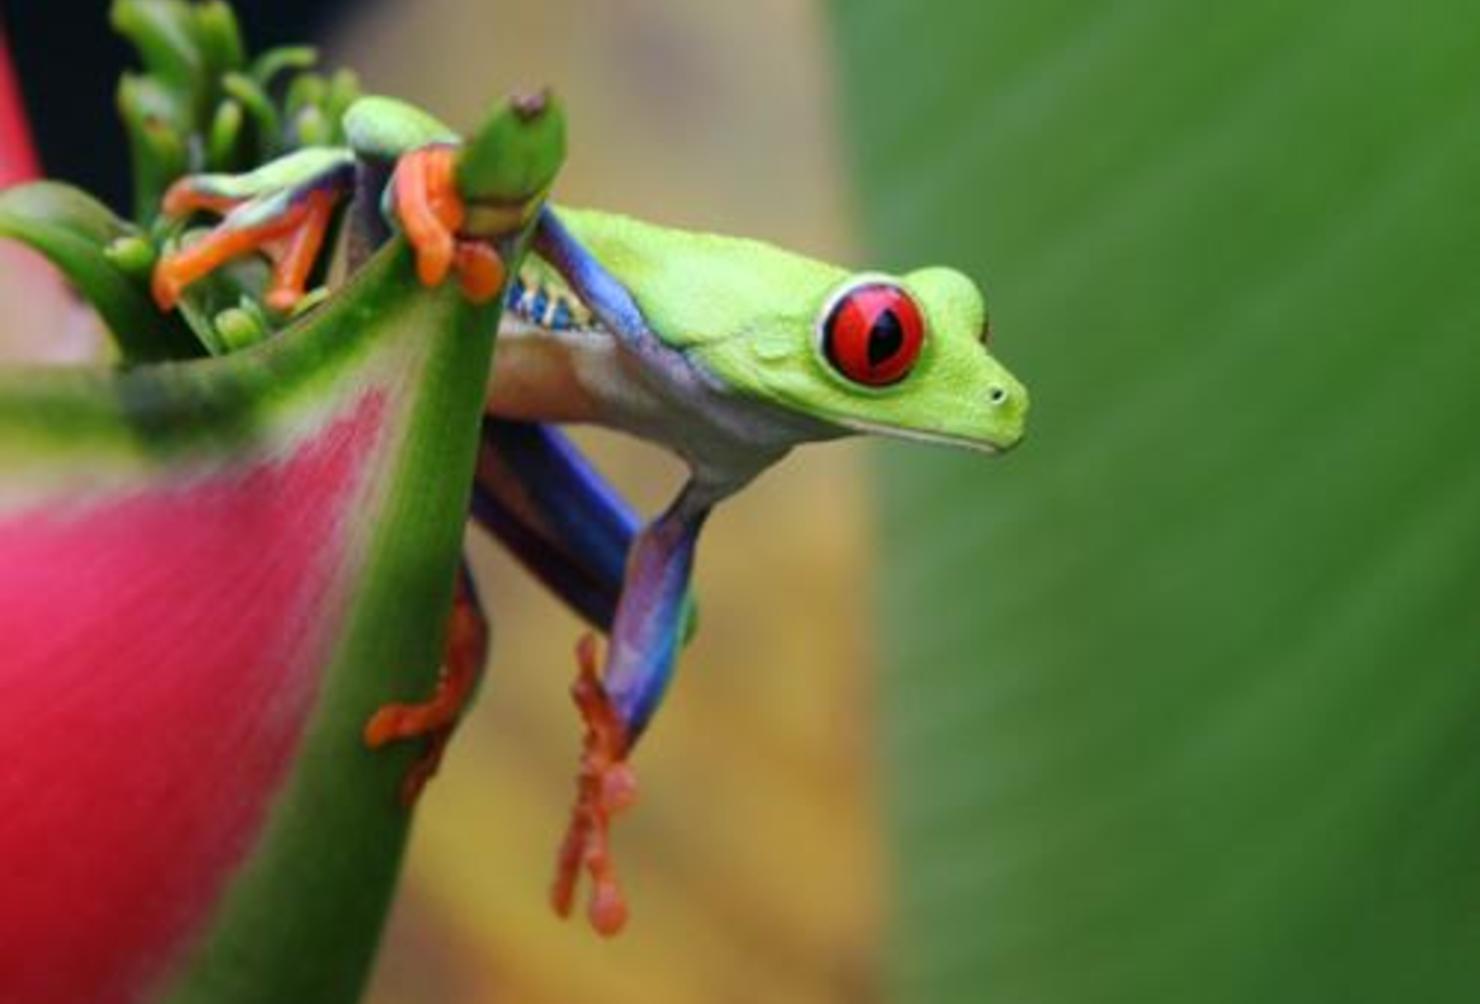 Facts about the Red-Eyed Tree Frog of Costa Rica